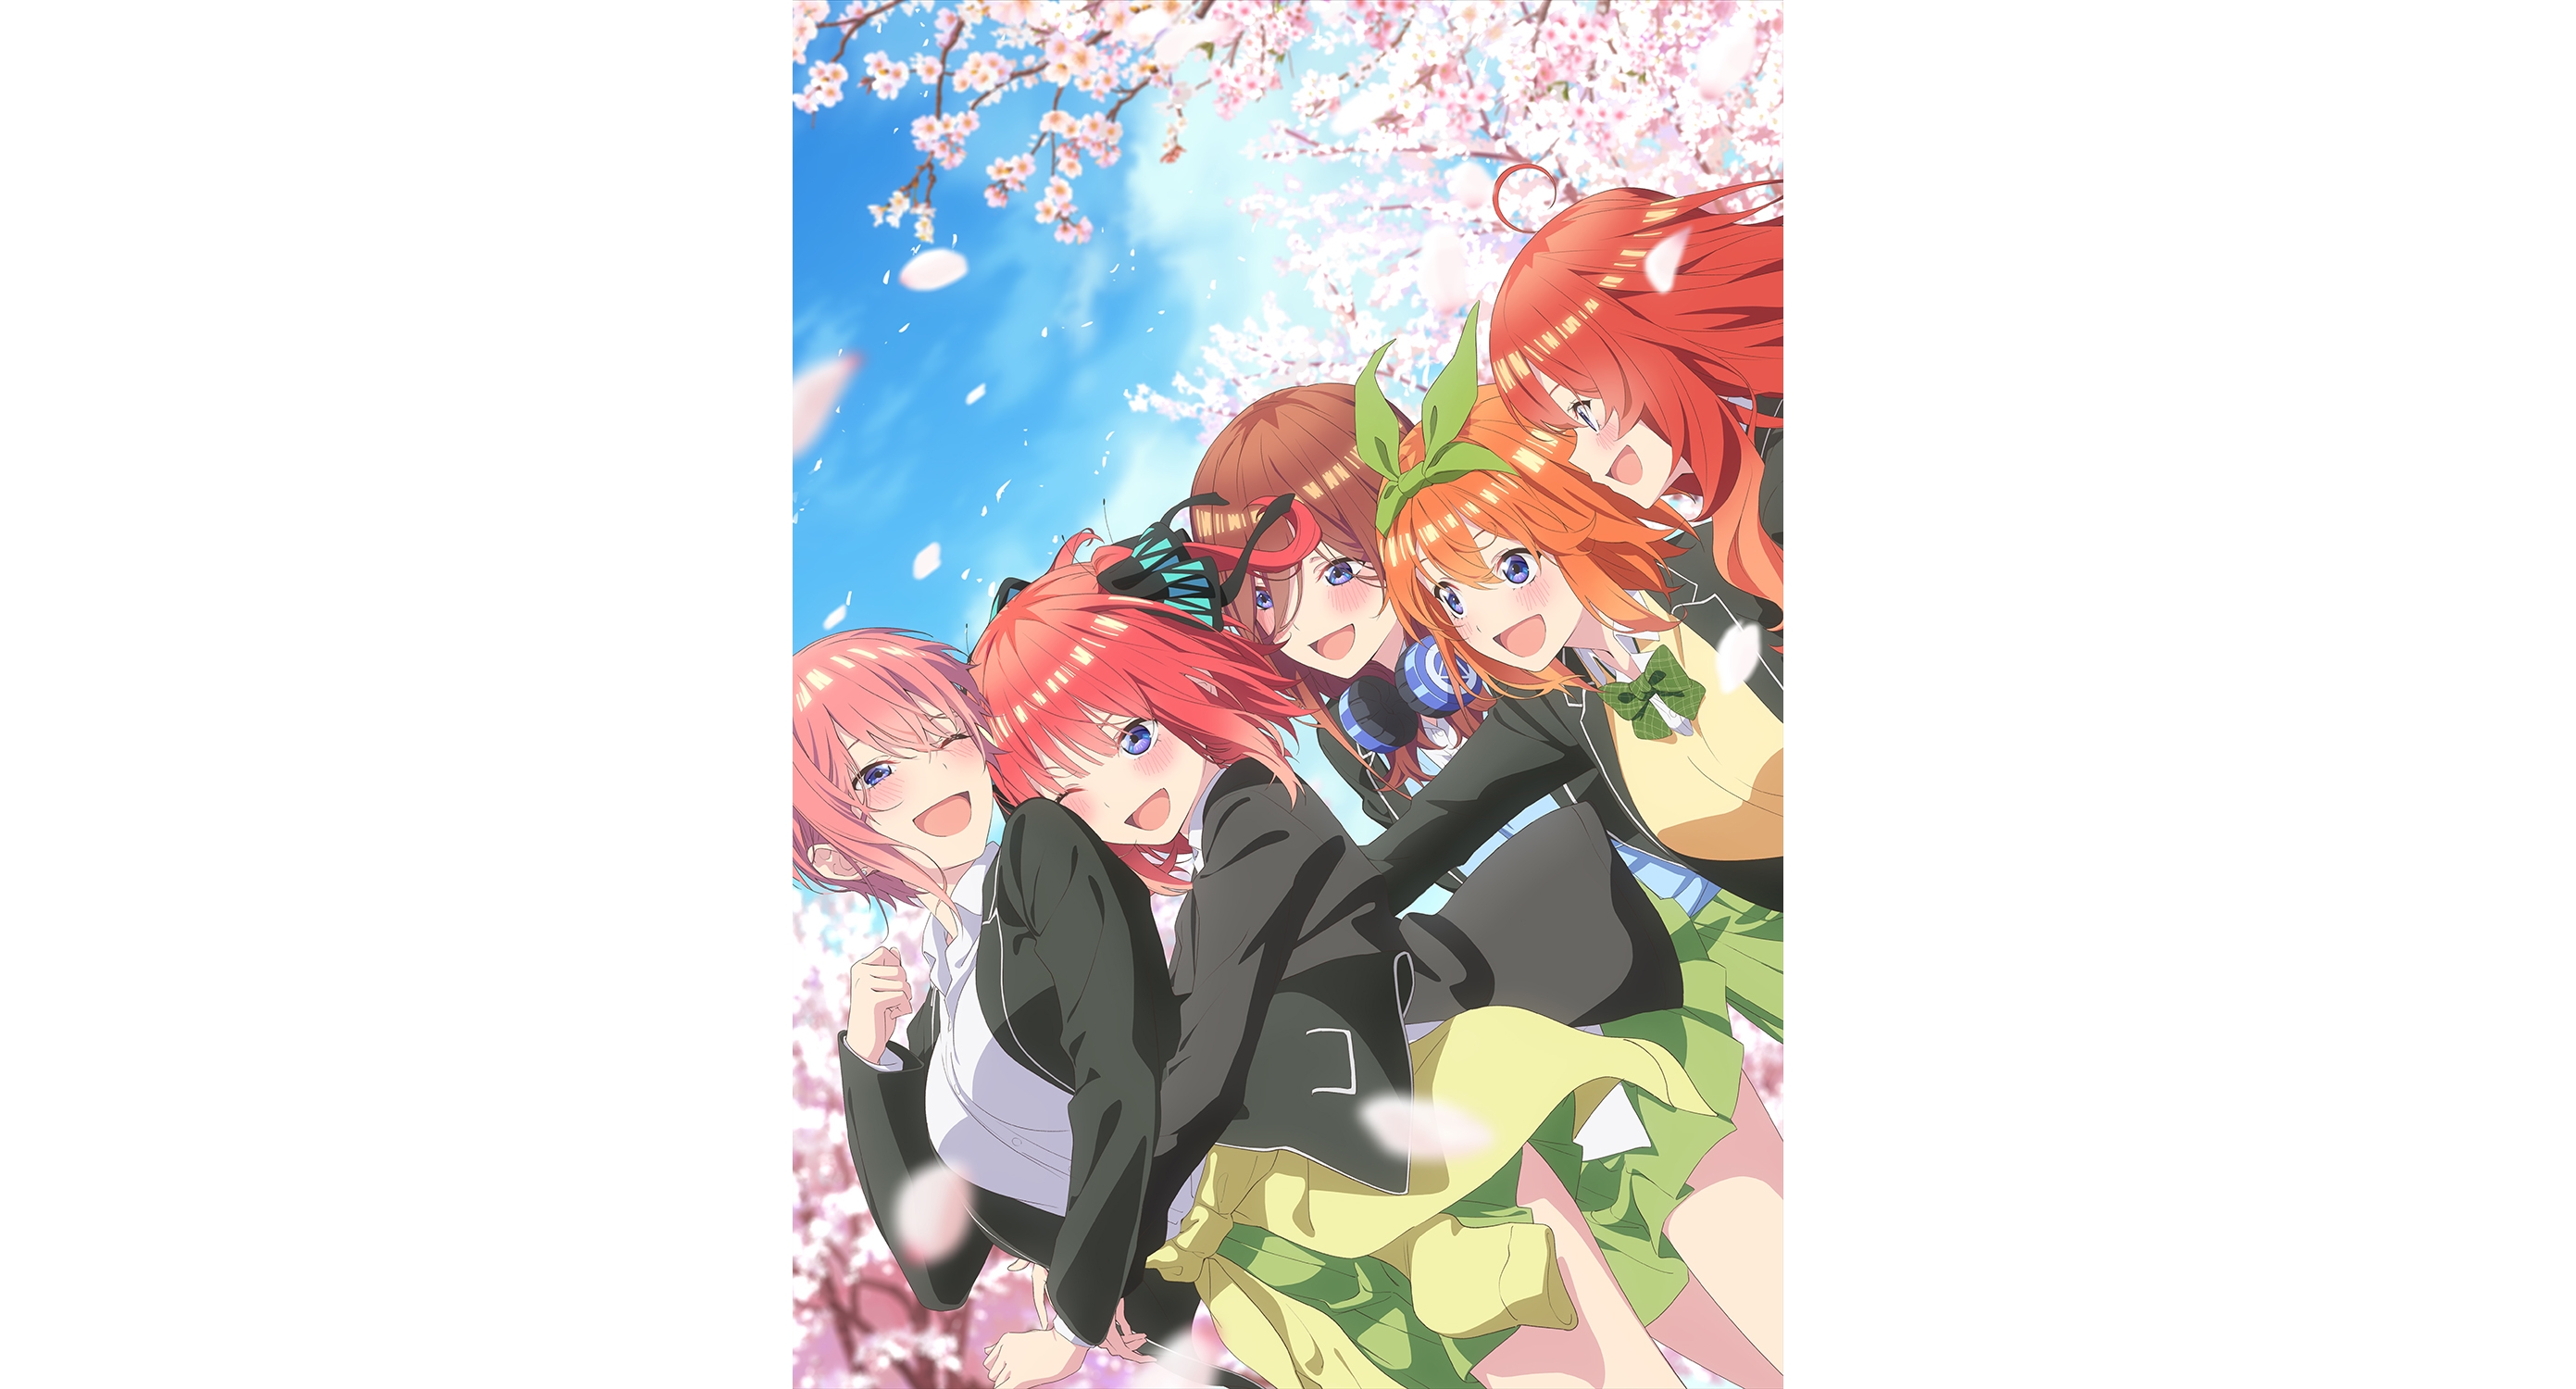 The Quintessential Quintuplets Anime Ending Isn't Perfect and Why